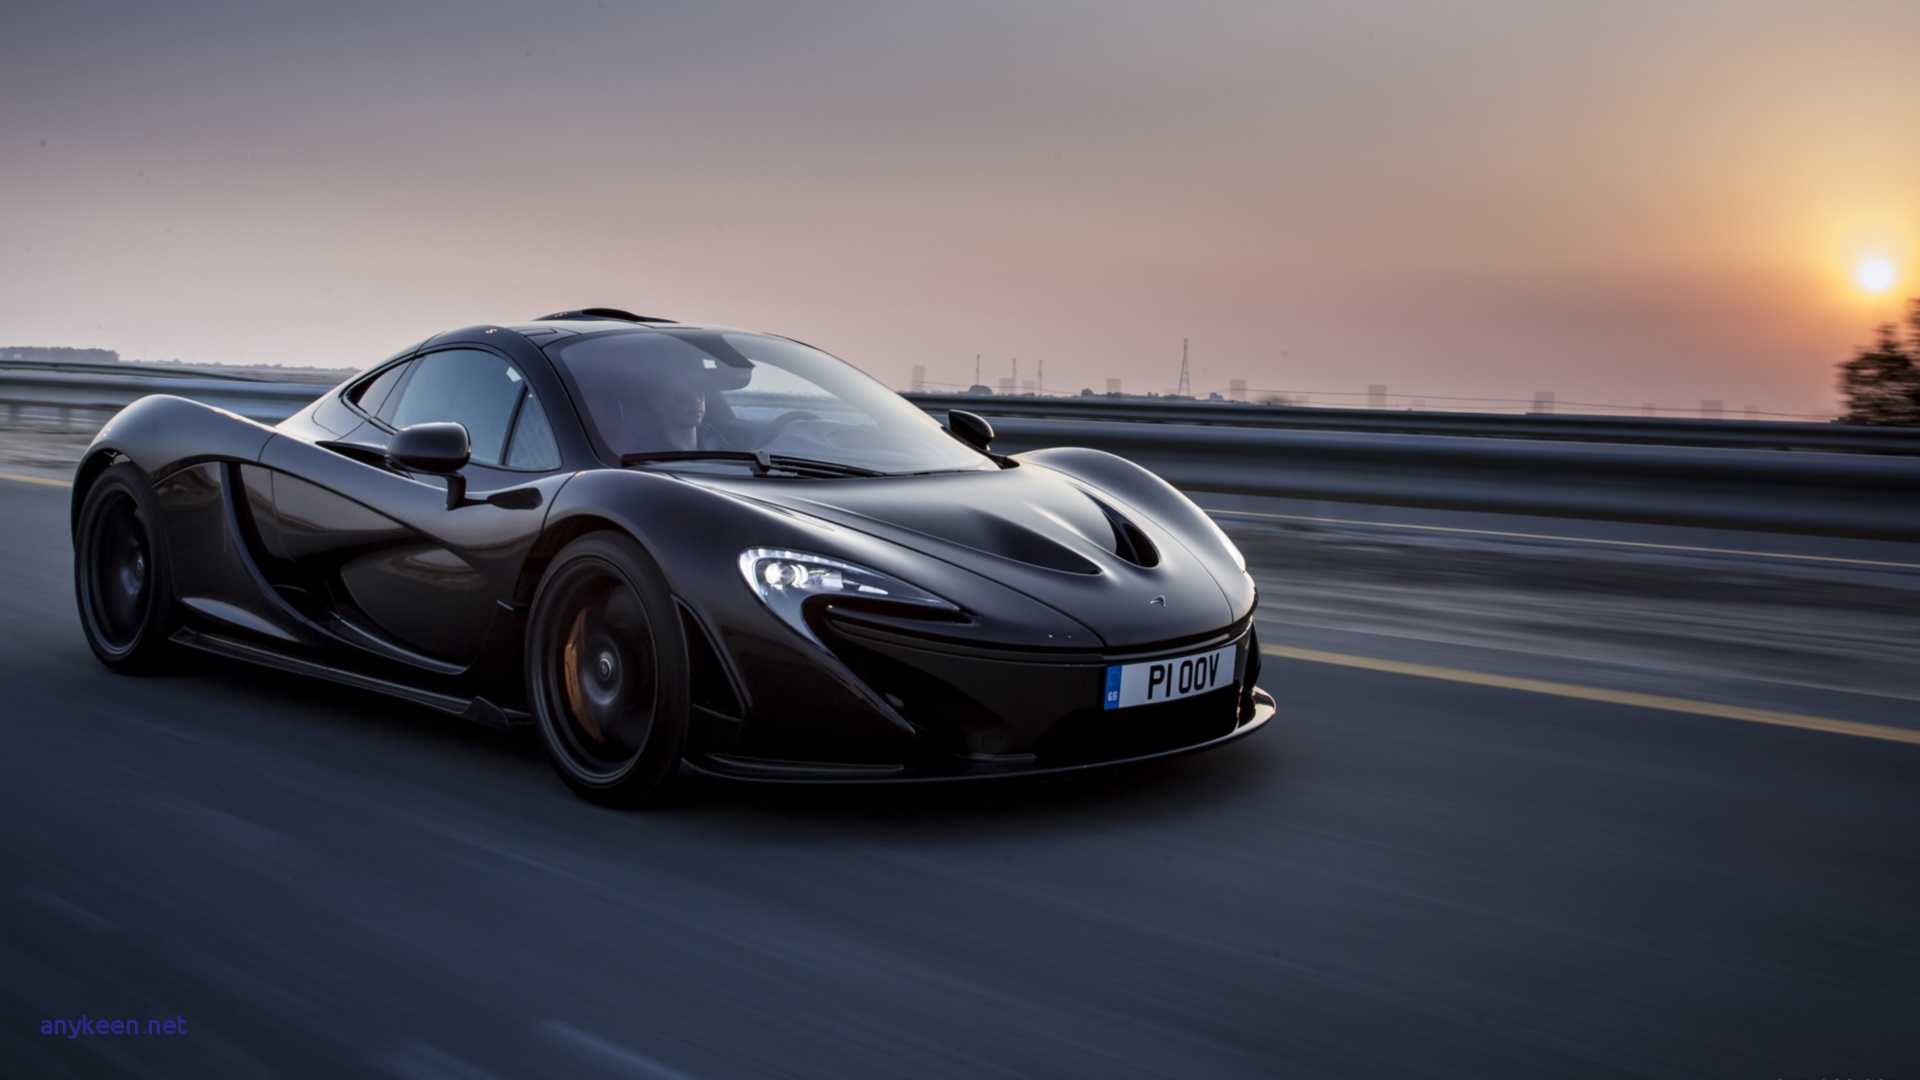 Mclaren P1 Full HD Wallpaper and Background Image Awesome Of Car